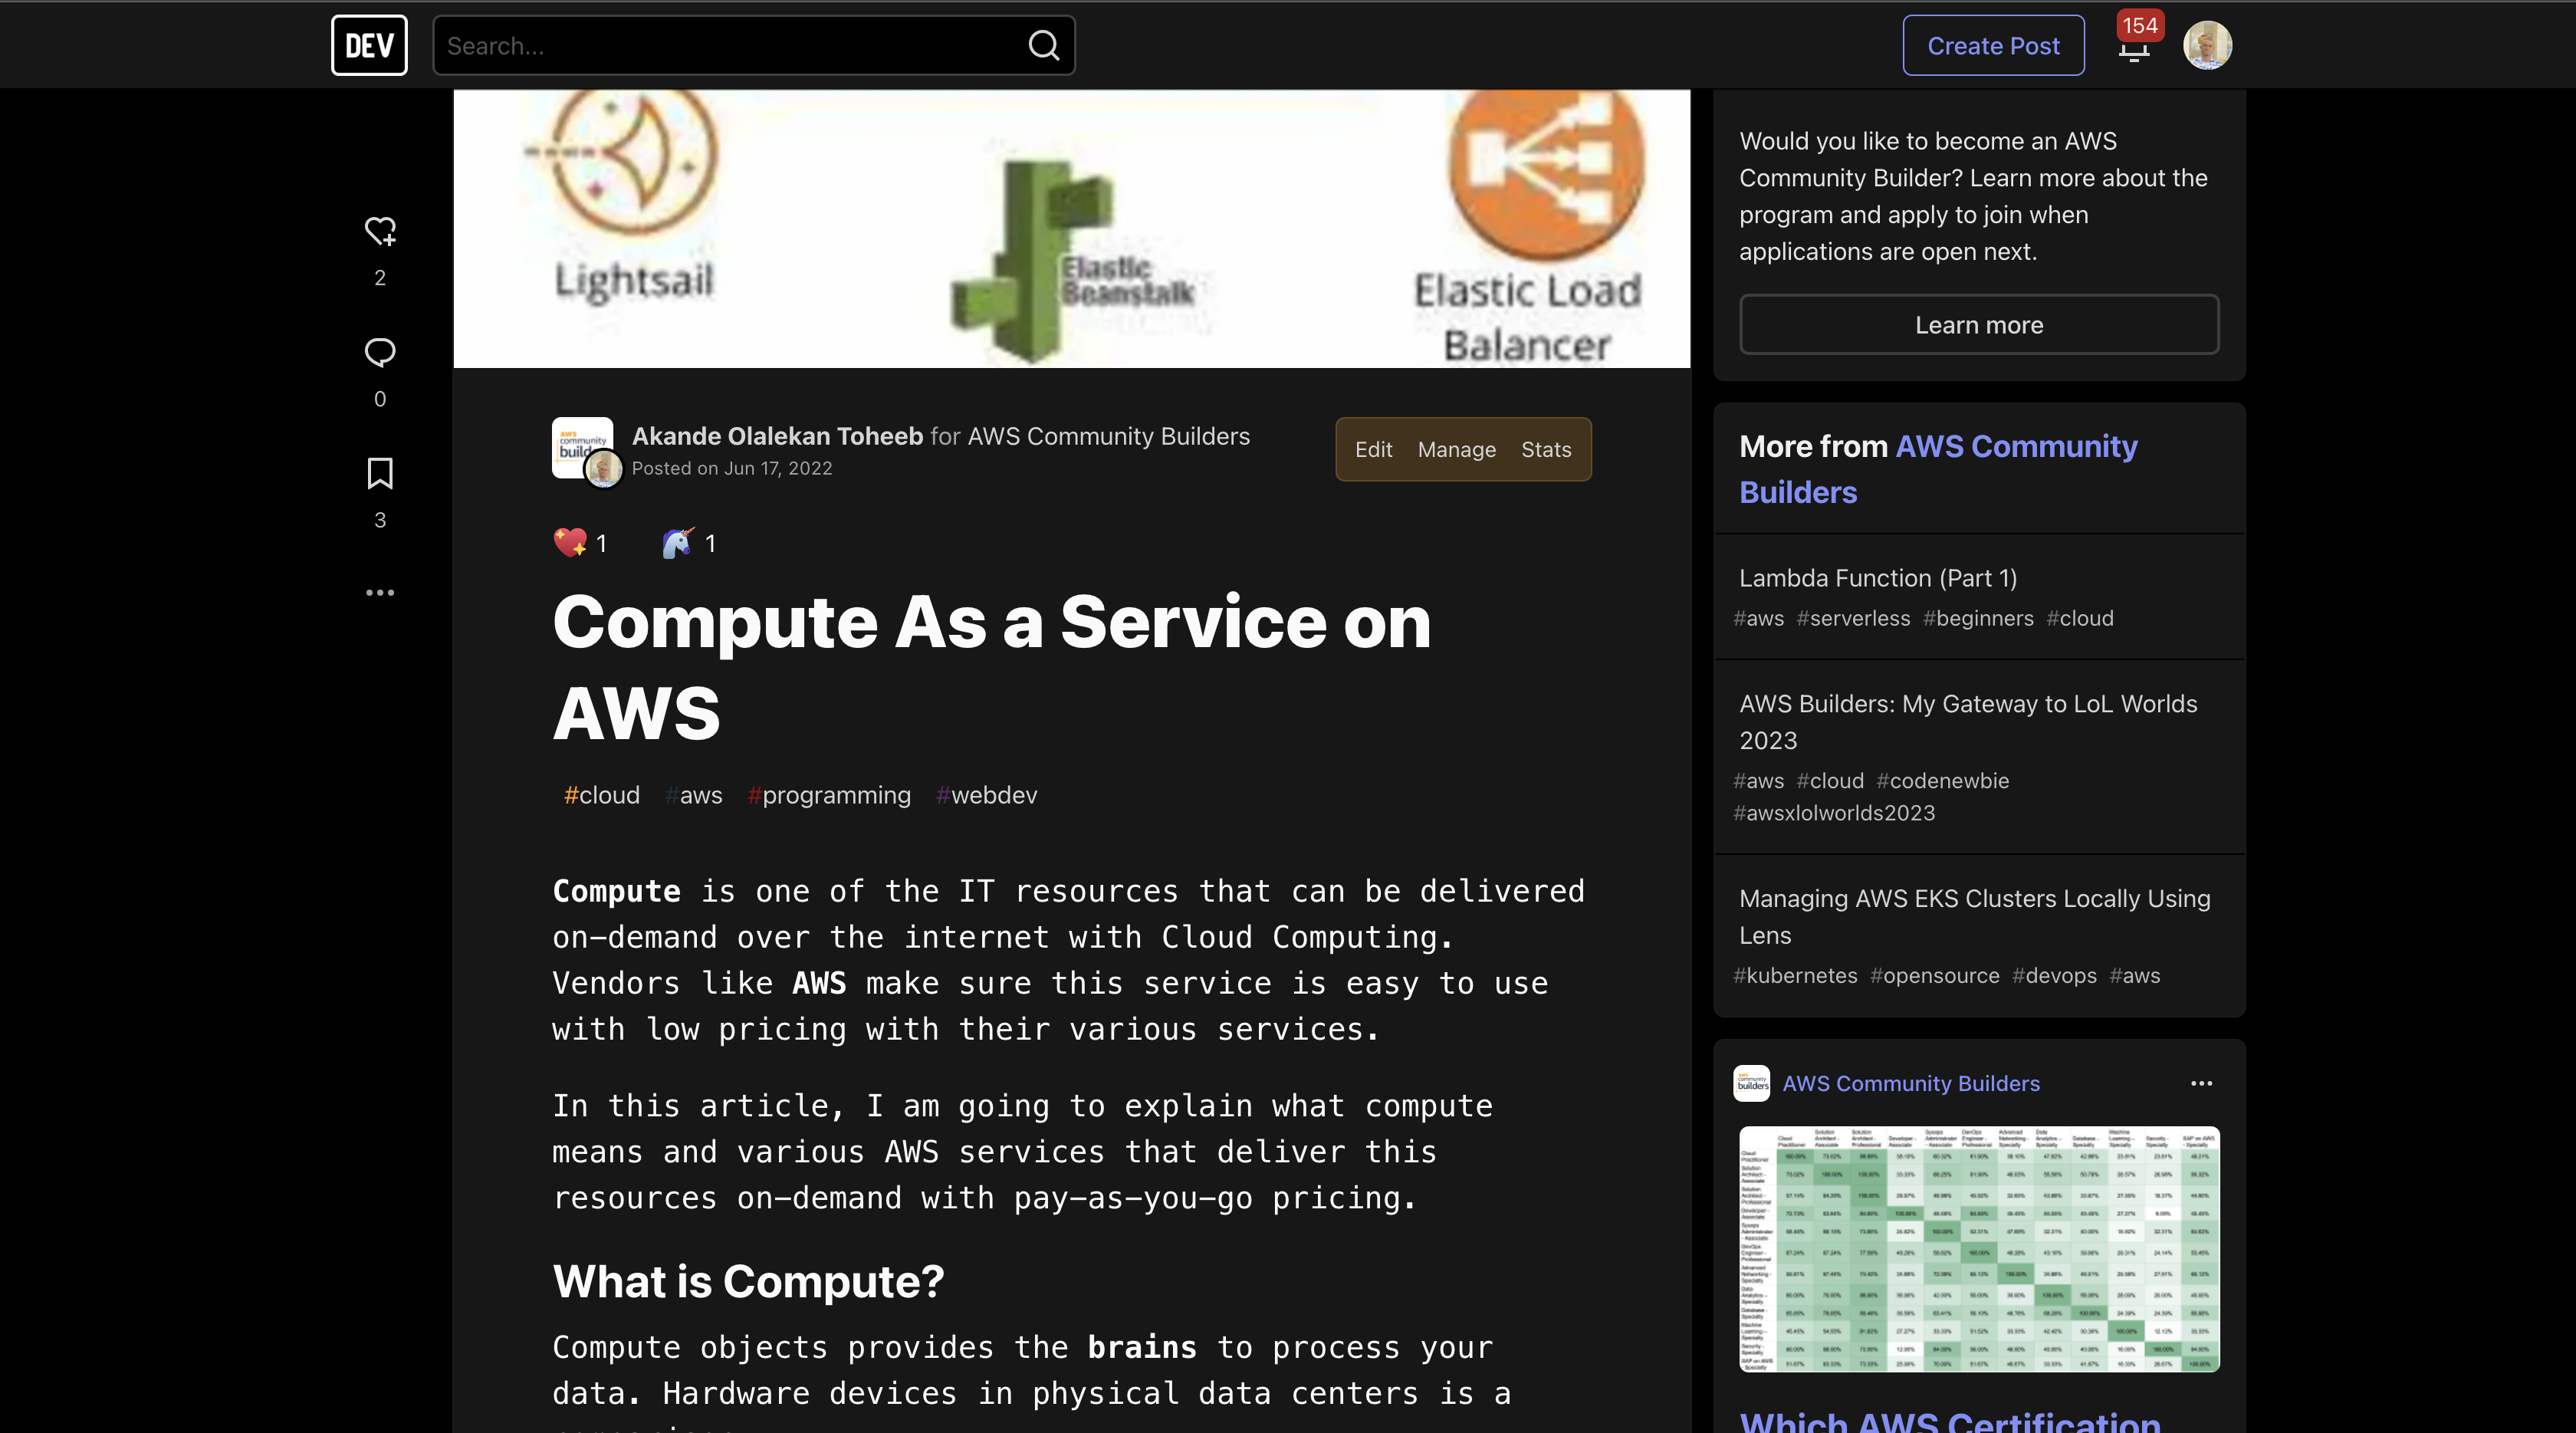 Compute As a Service on AWS